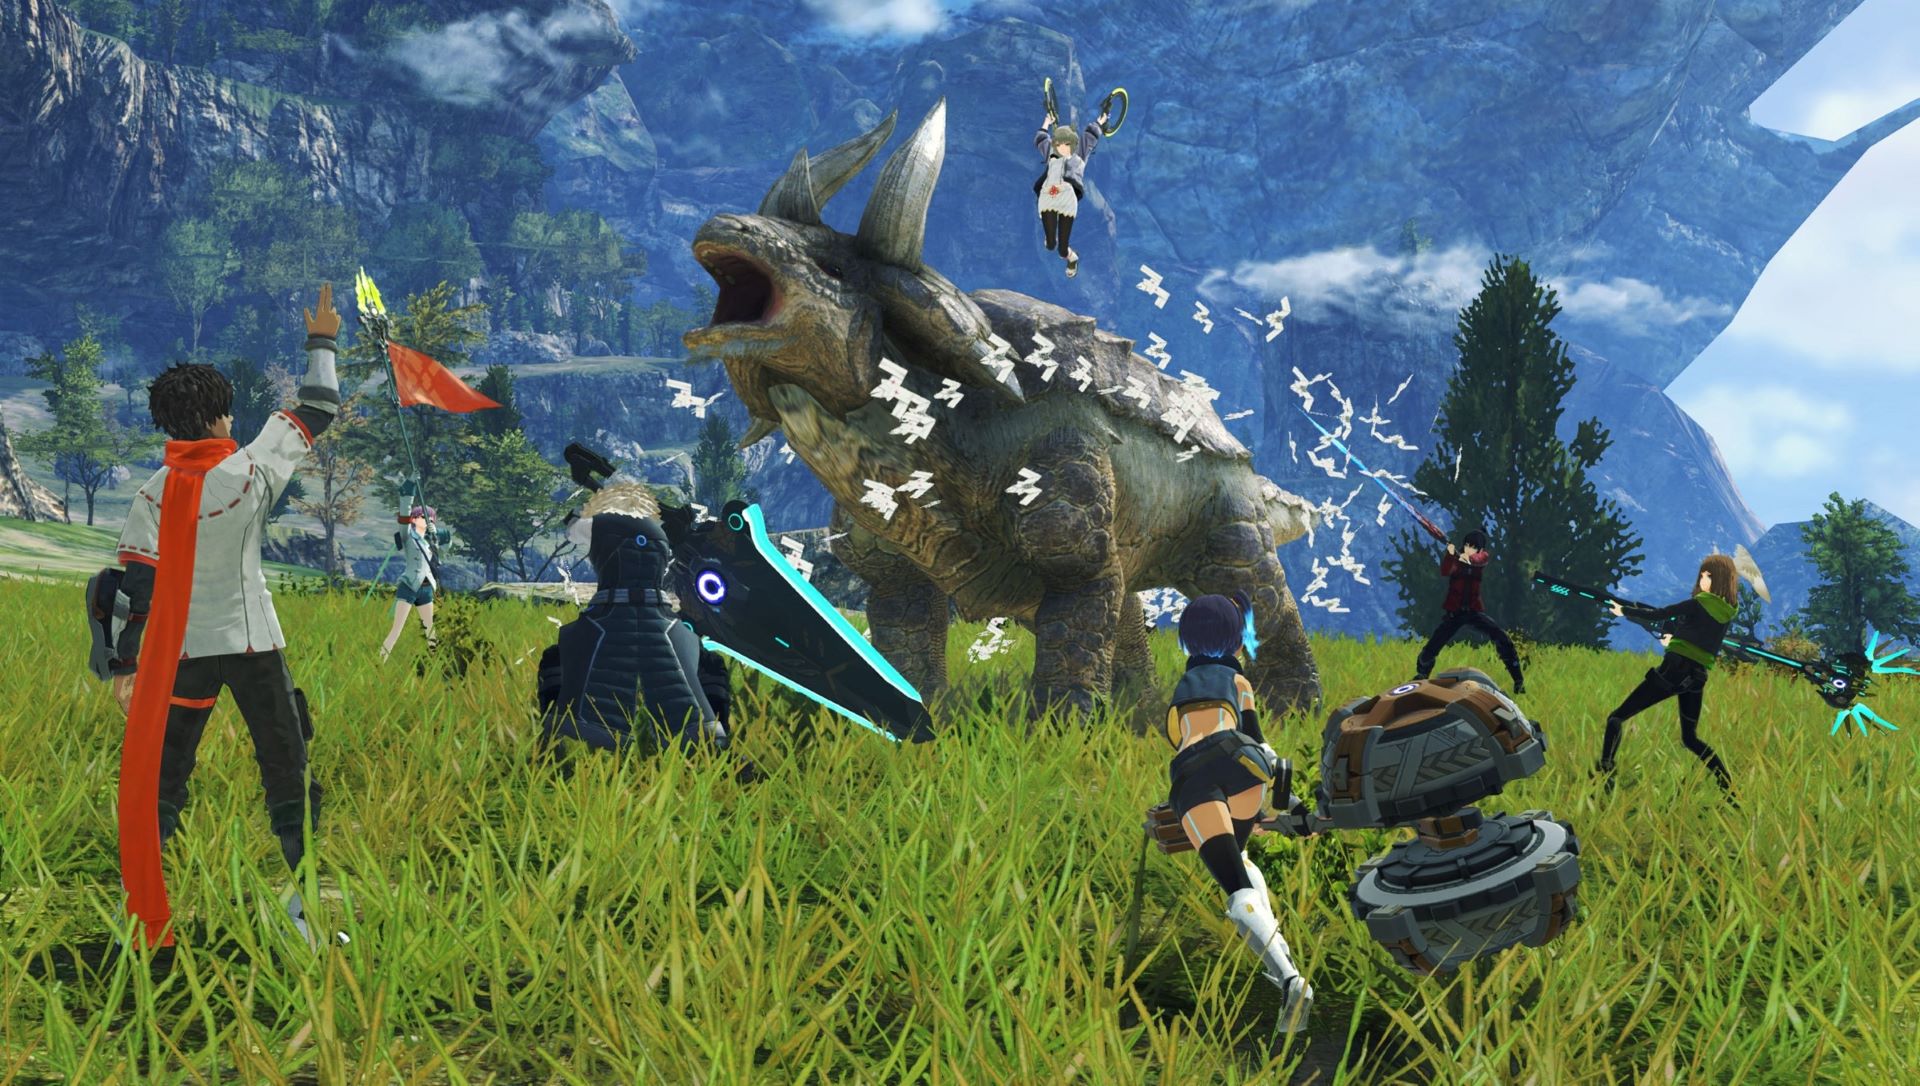 How to Perform Ouroboros Orders in Xenoblade Chronicles 3 After Chain Attacks